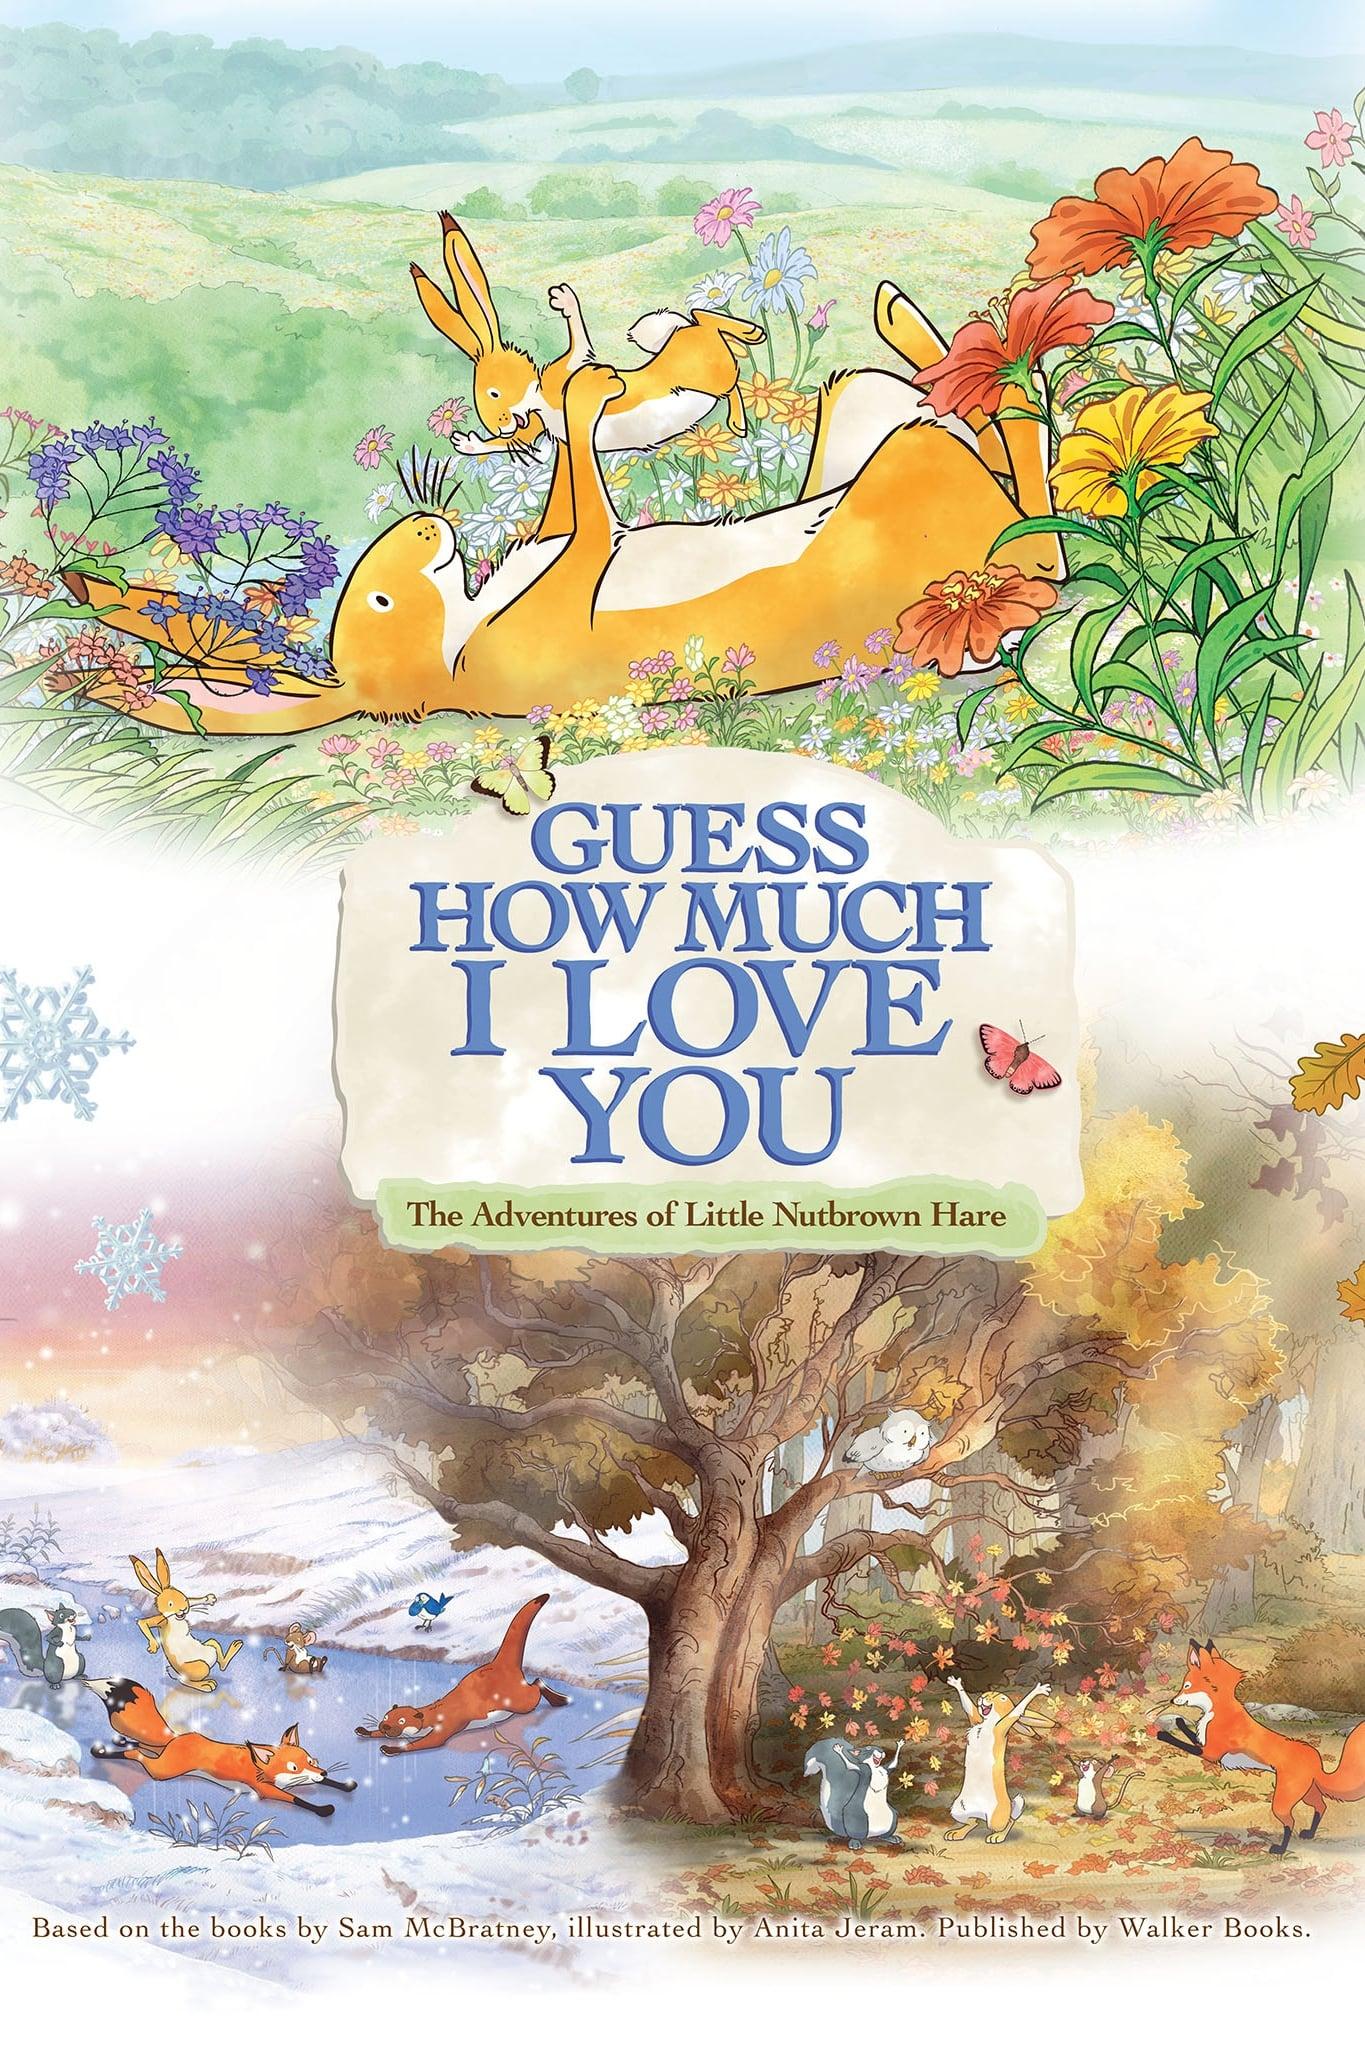 Guess How Much I Love You poster